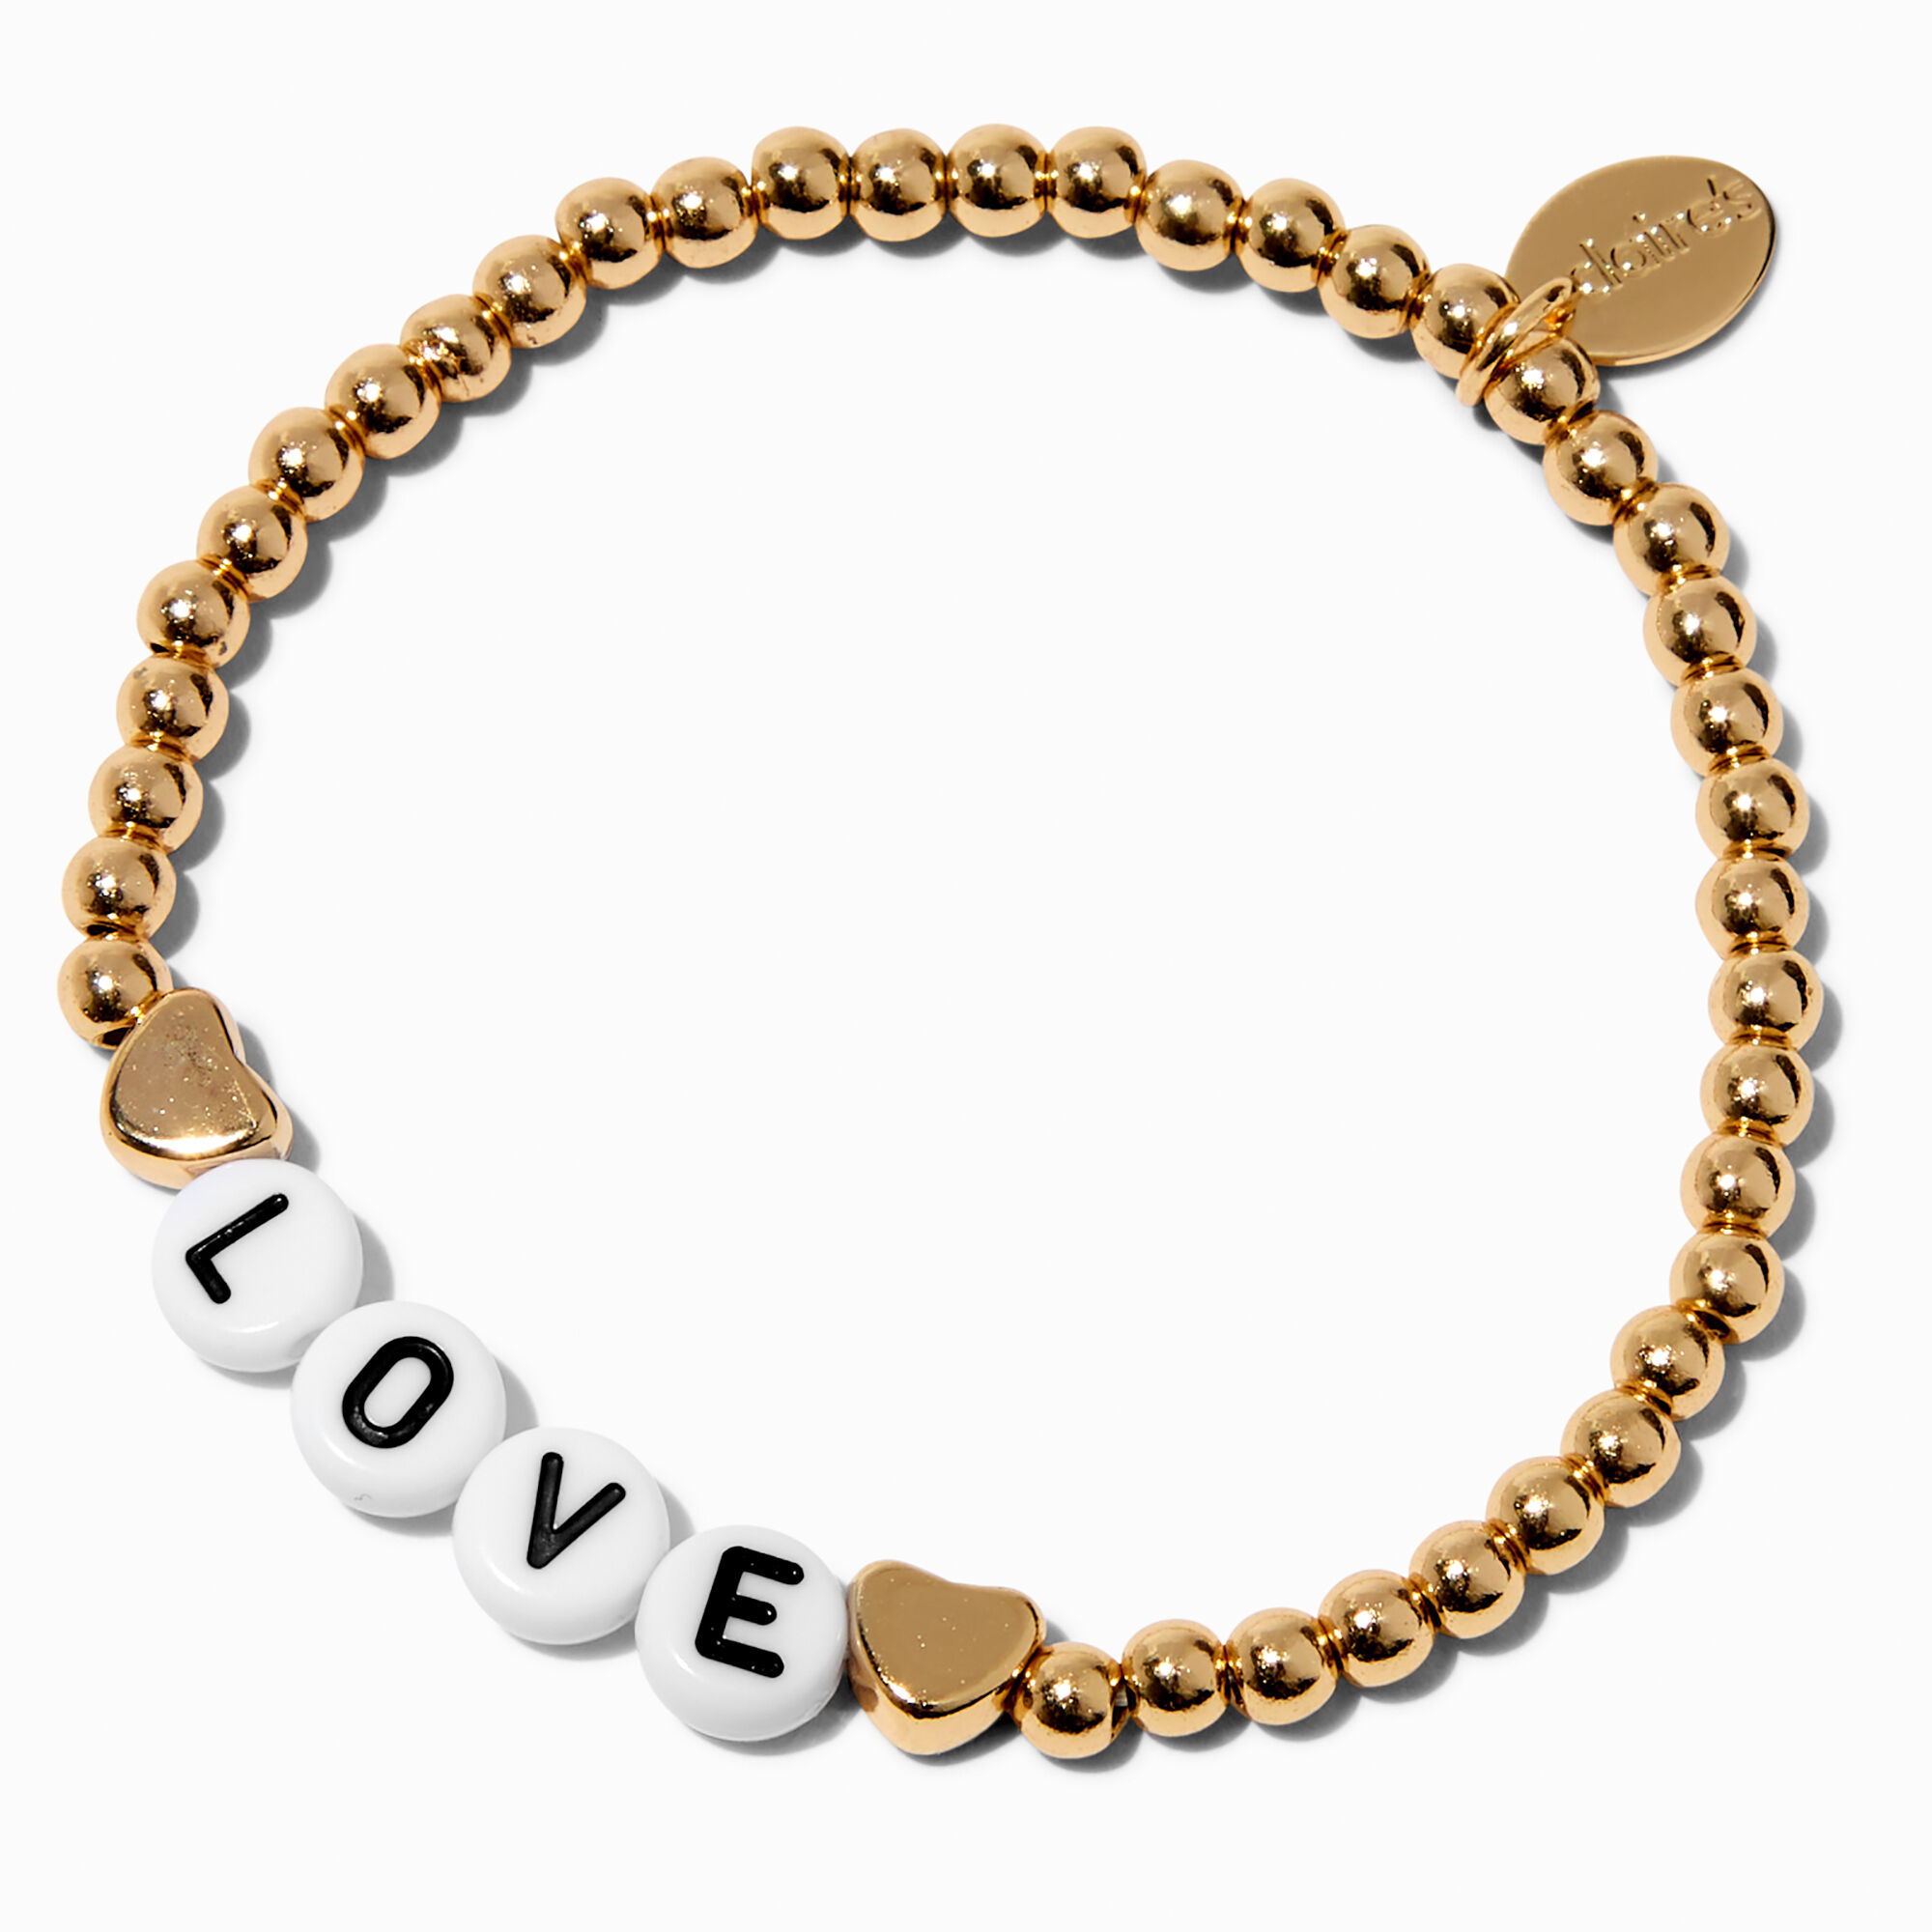 View Claires Lover Tone Beaded Stretch Bracelet Gold information